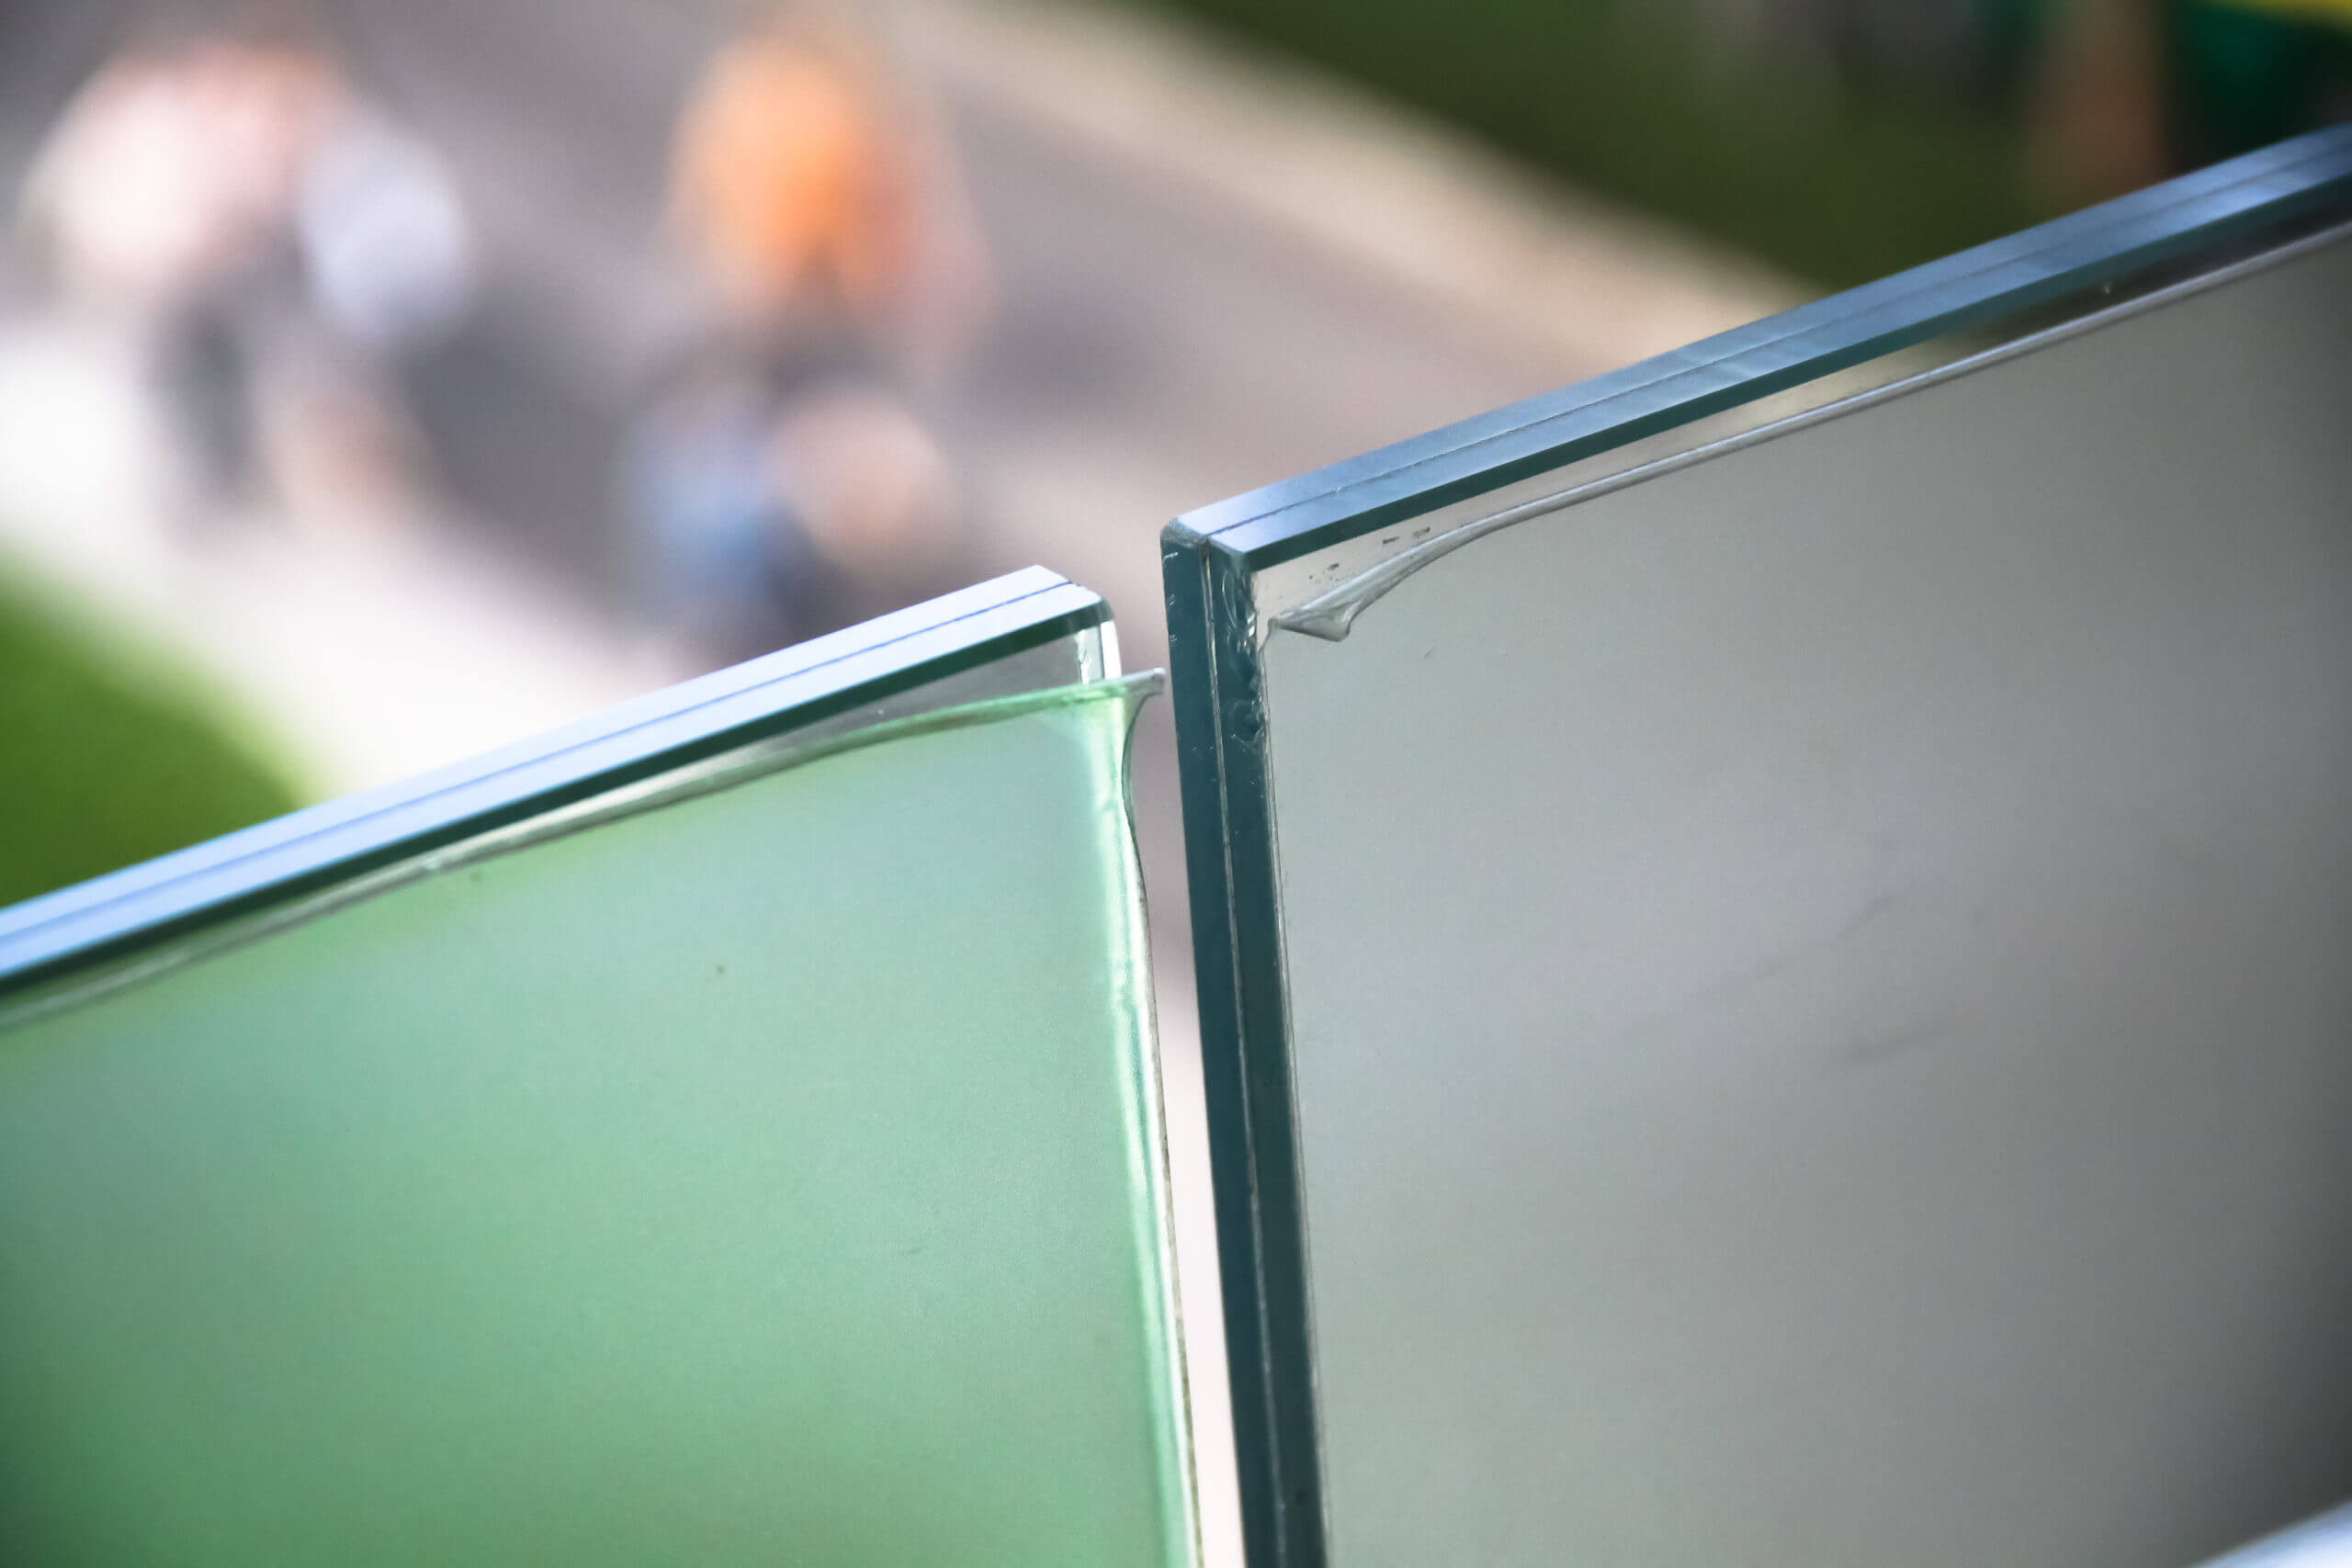 laminated and tempered glass - types of window glass - Modernize